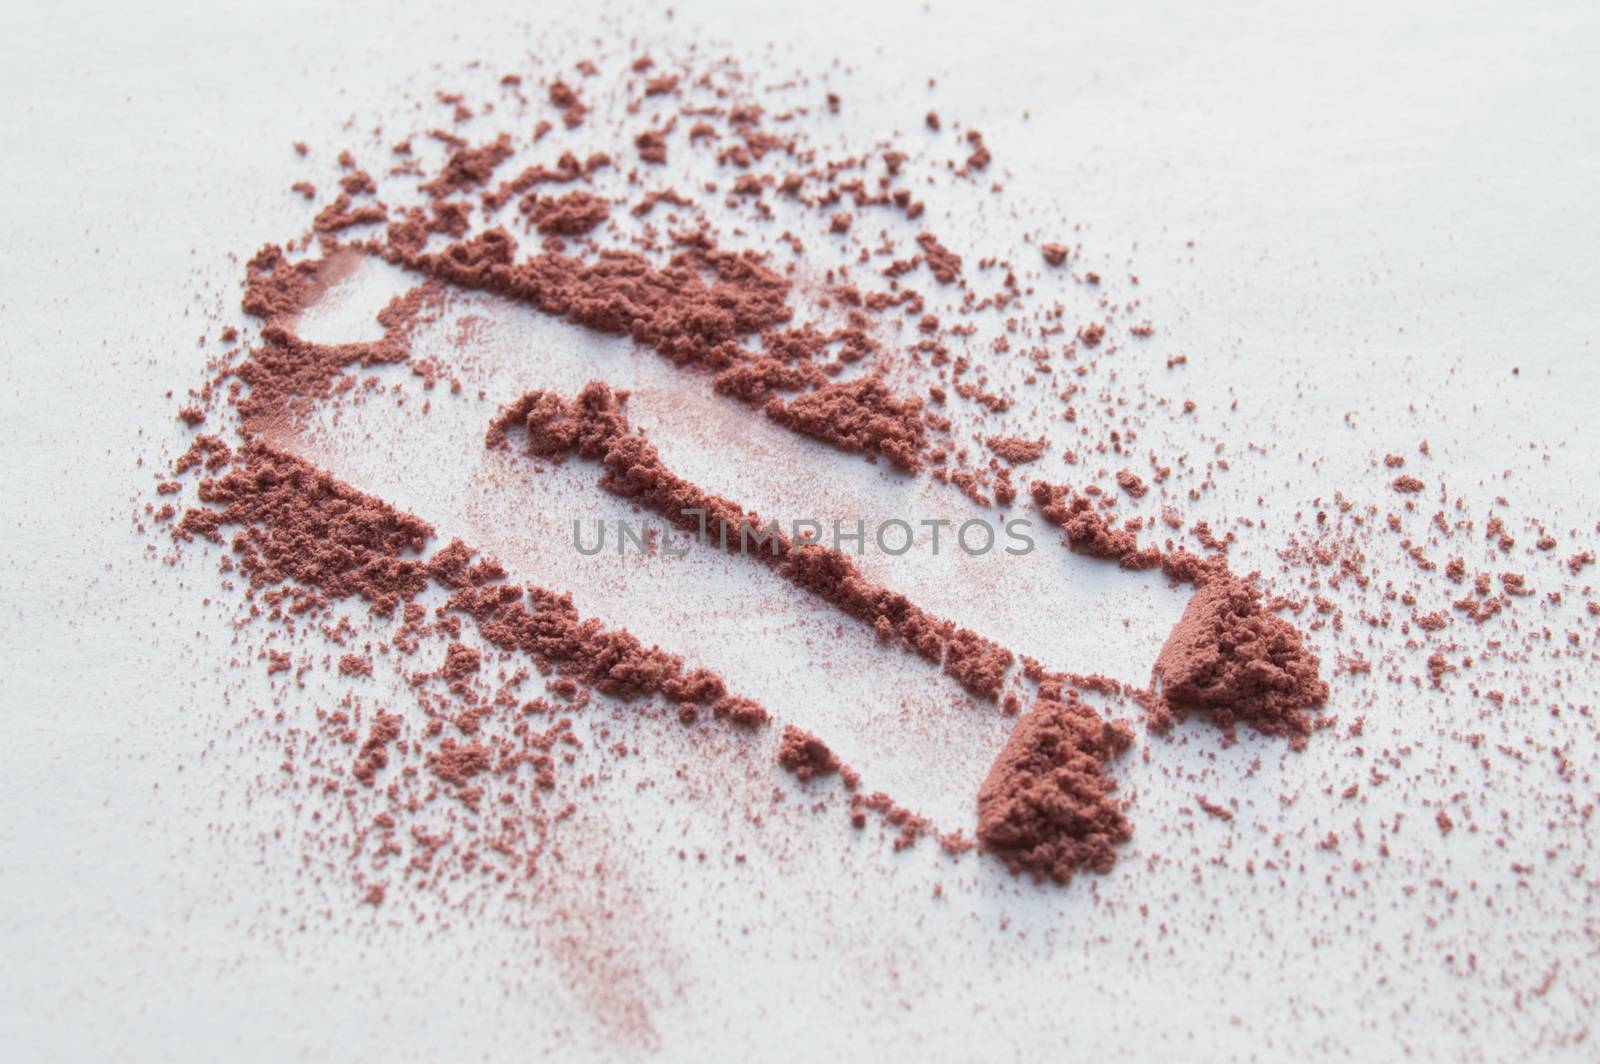 Scattered beige powder, Crumbles natural makeup powder on white background.